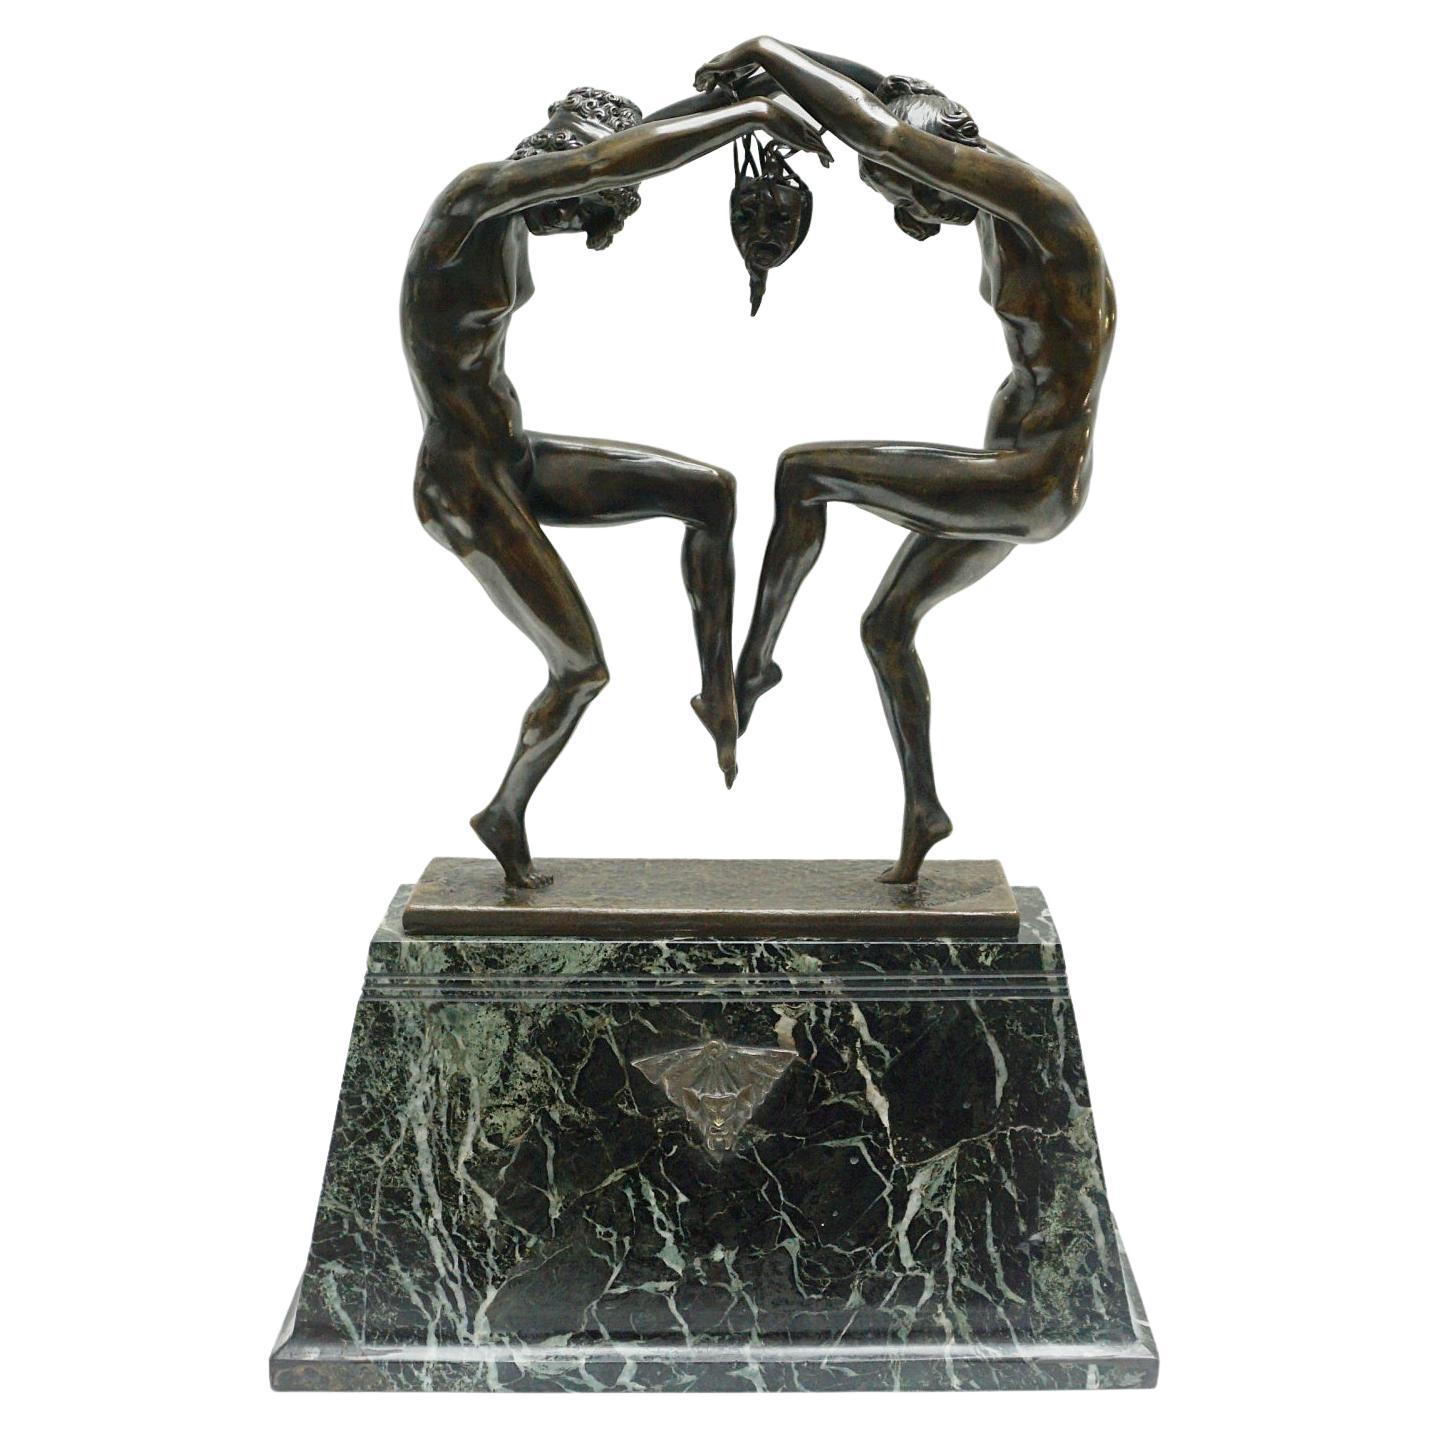 Original Art Deco Bronze and Marble Sculpture, French, C1920